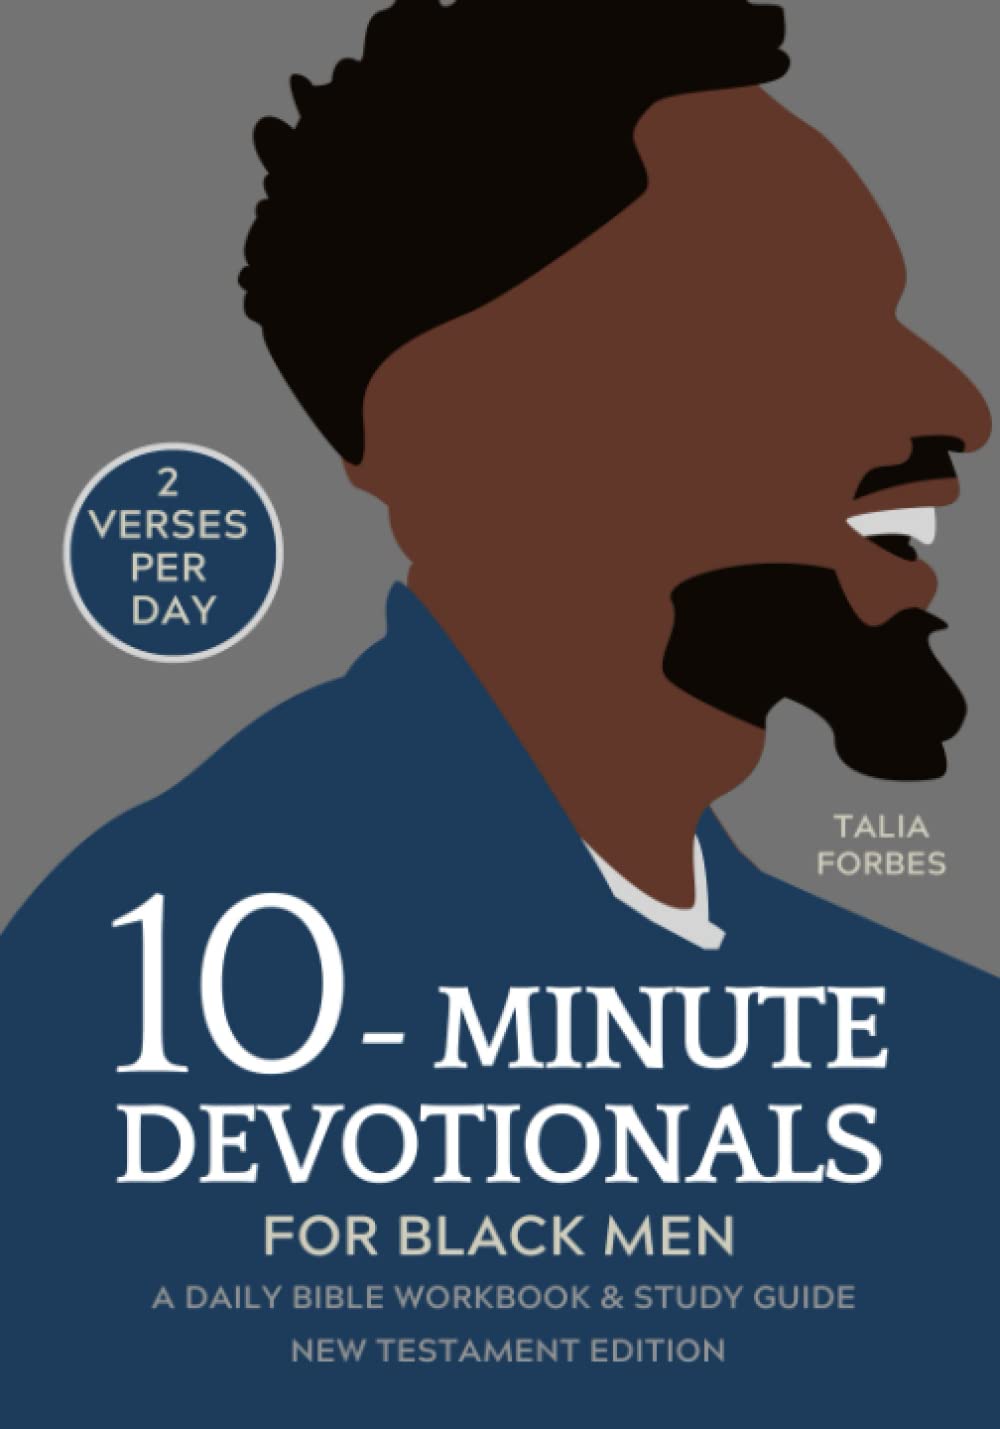 10-Minute Devotionals for Black Men: A Daily Bible Workbook & Study Guide (New Testament Edition) | Find Comfort Through Jesus & Develop Strength and Courage With Scripture